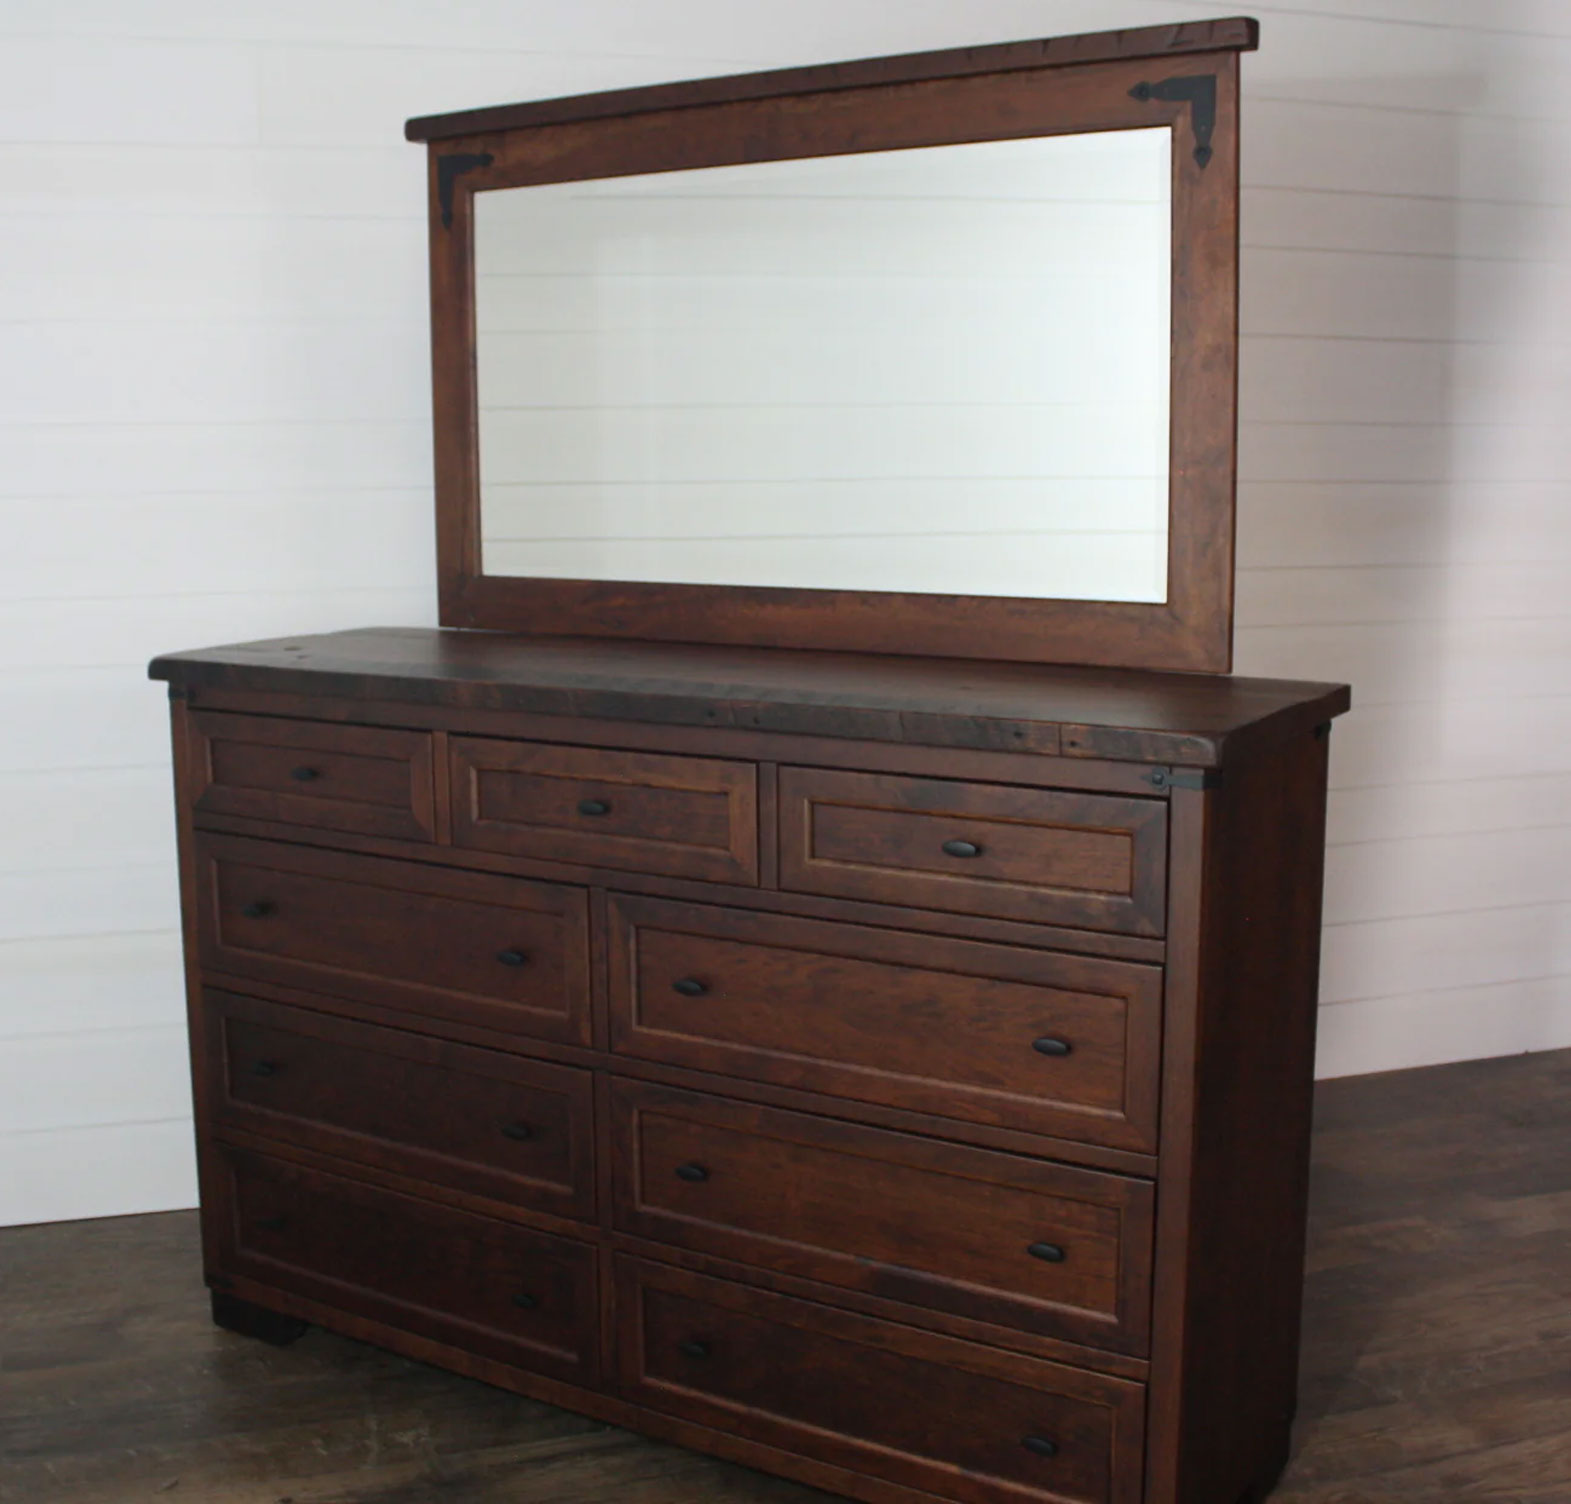 Farmhouse Heritage Tall Dresser and Mirror in Rustic Cherry with Reclaimed Top